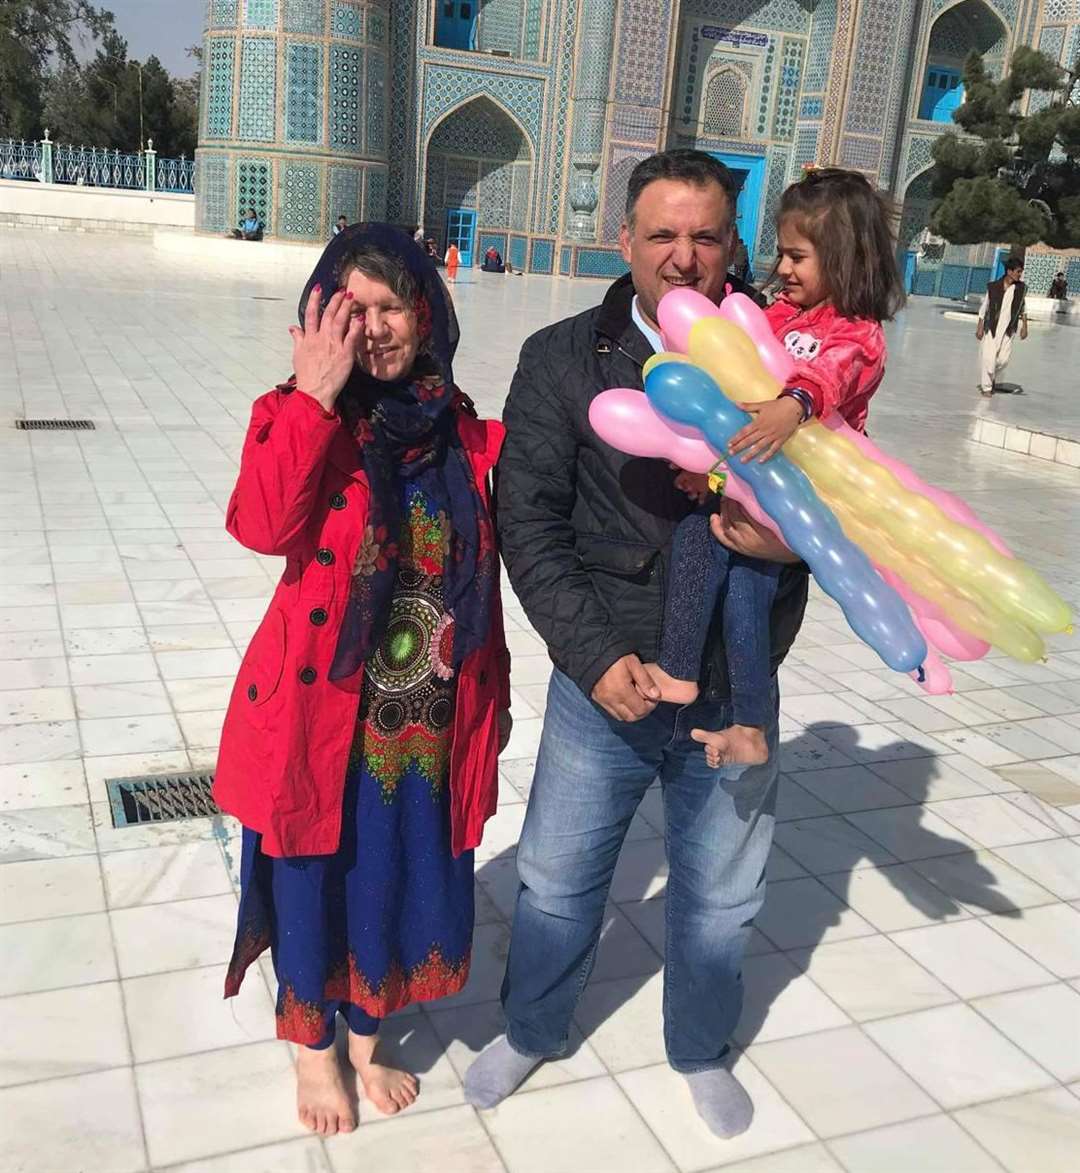 Taxi driver Kaneshka Morady and wife Helga have been left fearing for the safety of their adopted daughter Aisha in Afghanistan. Photo: Kaneshka Morady